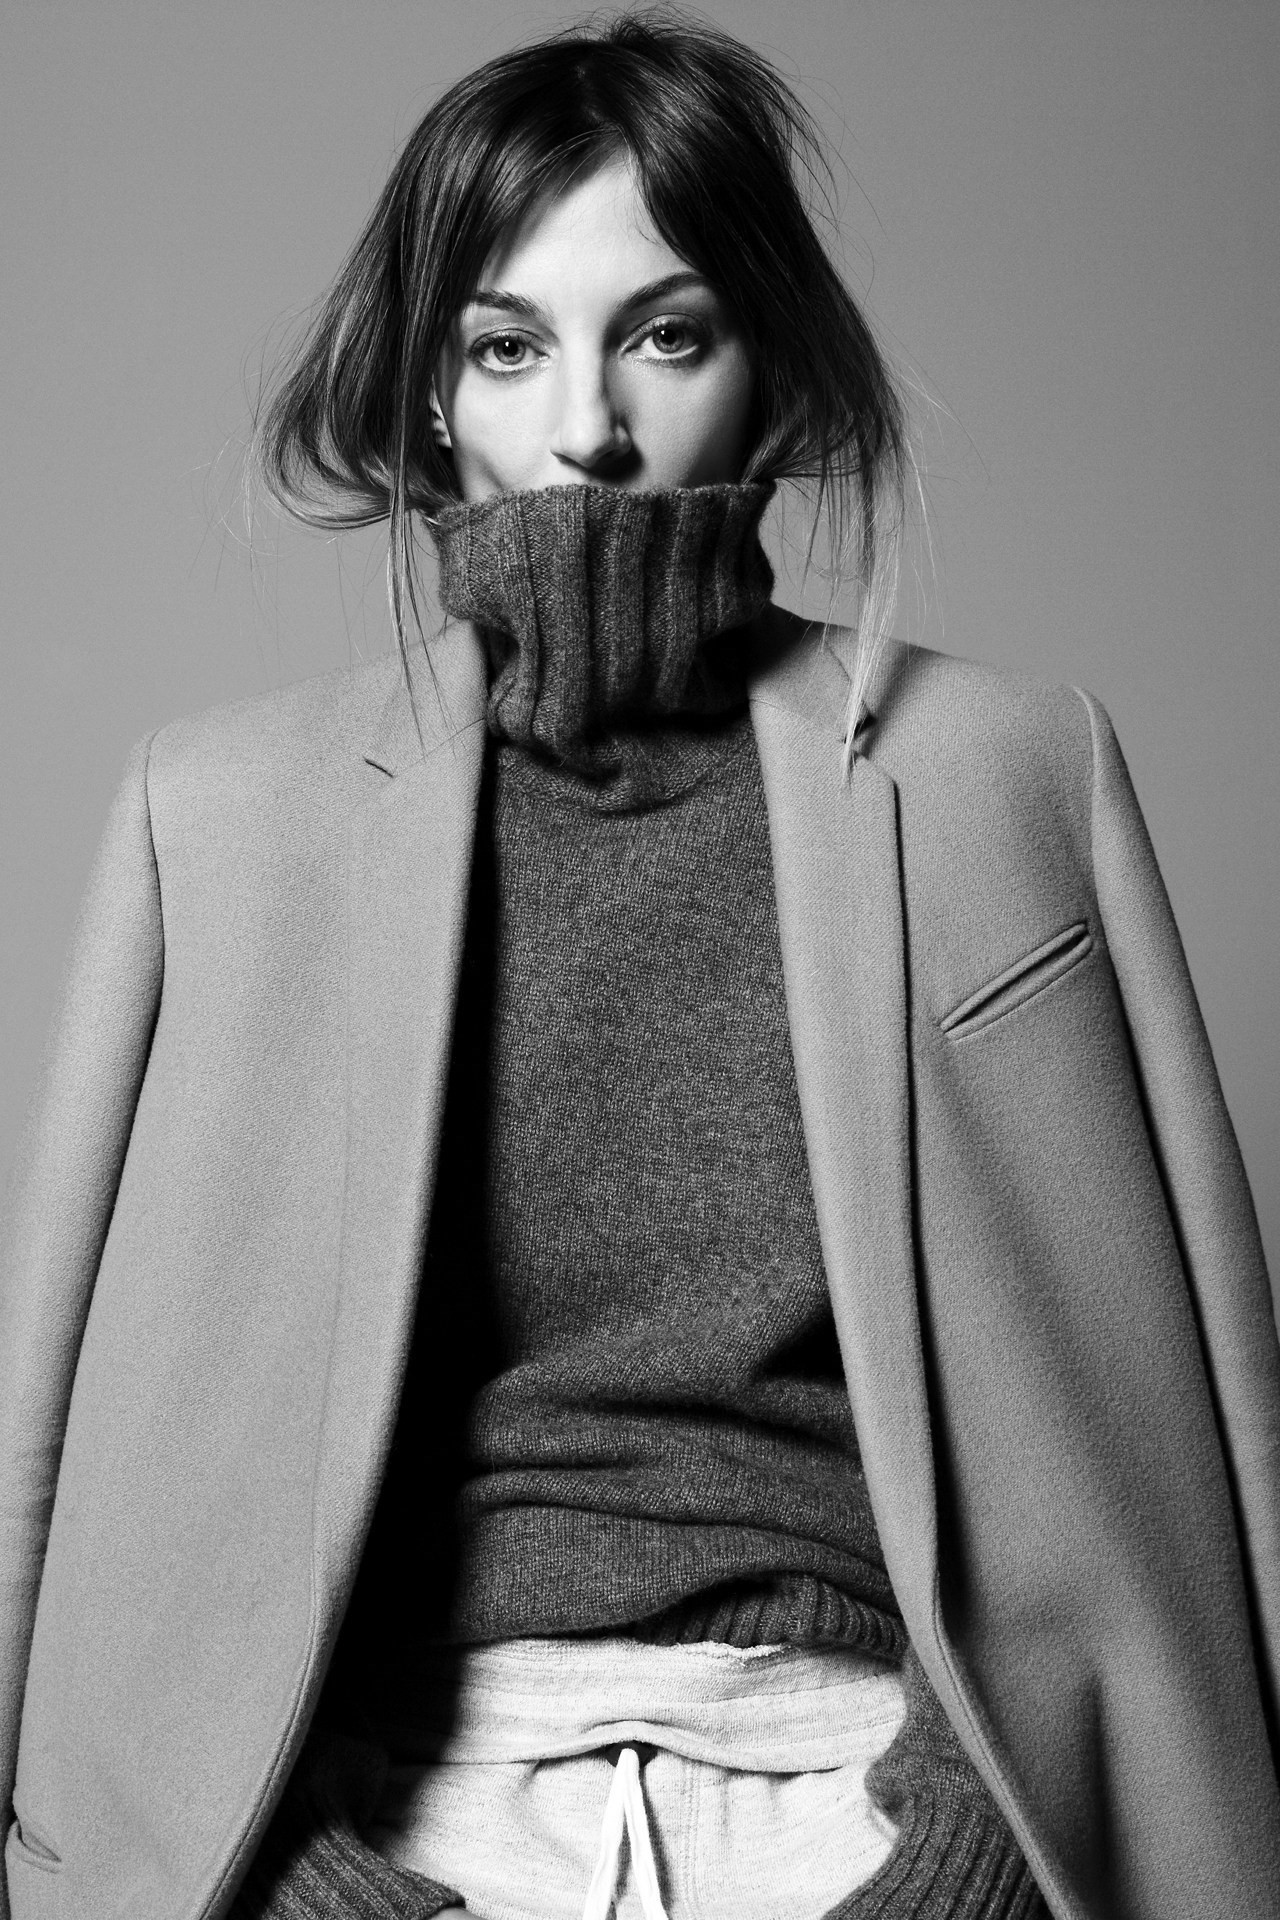 Céline With The Accent on Instagram: Phoebe Philo photographed by